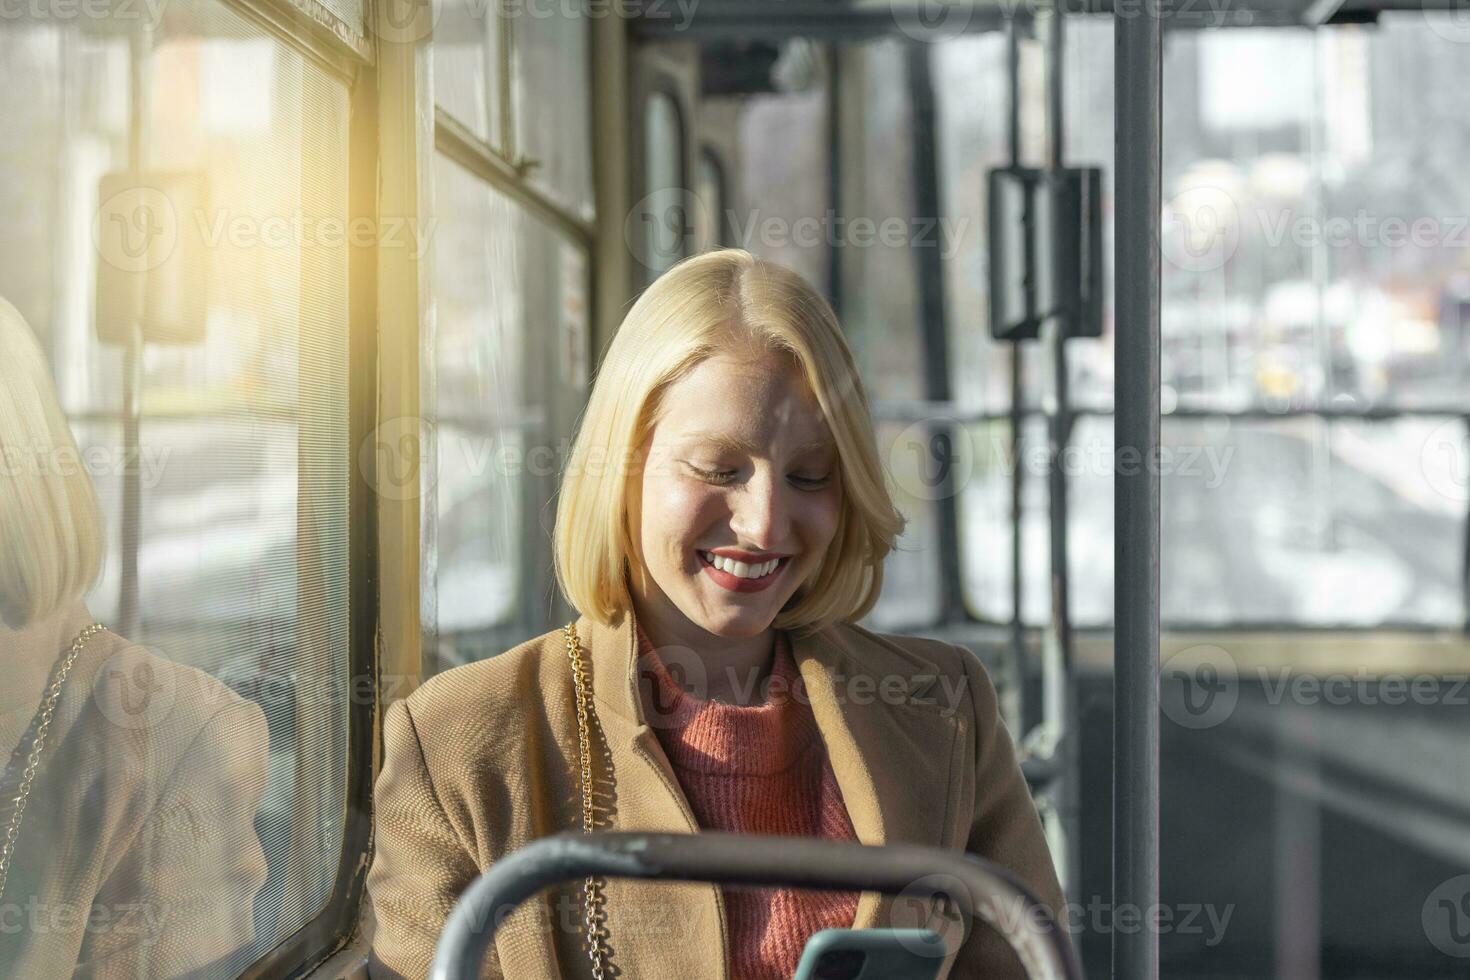 people in public transport, commuters, woman passenger looking at the screen of her smartphone photo